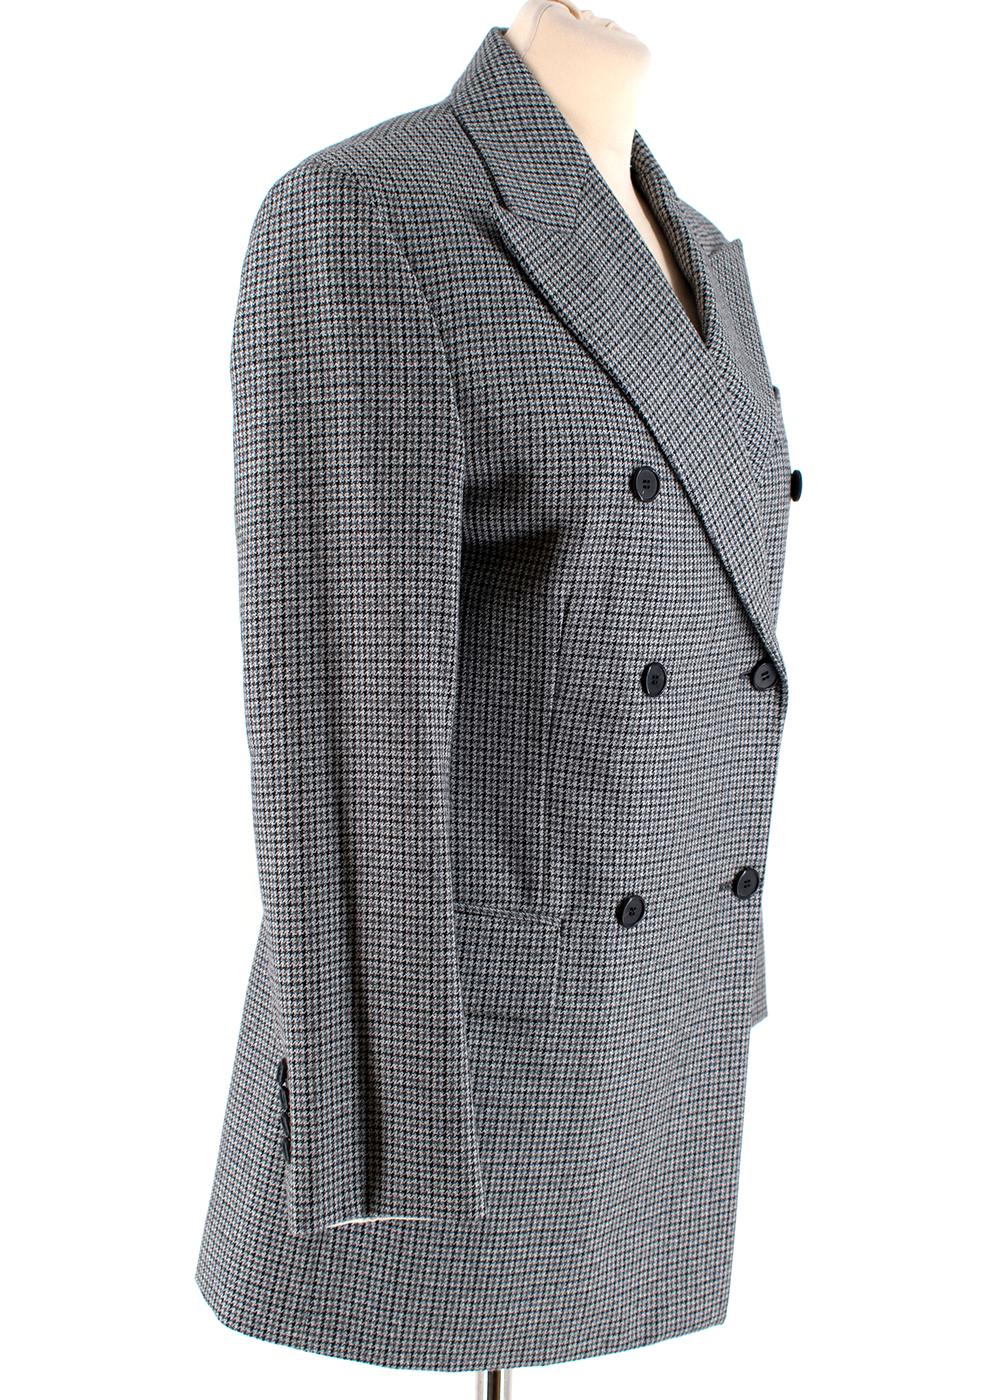 Calvin Klien Blazer 38 IT

- houndstooth woven design
- Revere collar
- Double breasted
- Black buttons
- Padded shoulders
- White lining
- Patch pockets
- Vent
- Four buttons at cuff

Materials:

100% virgin wool
Lining: 100% cotton

Made in